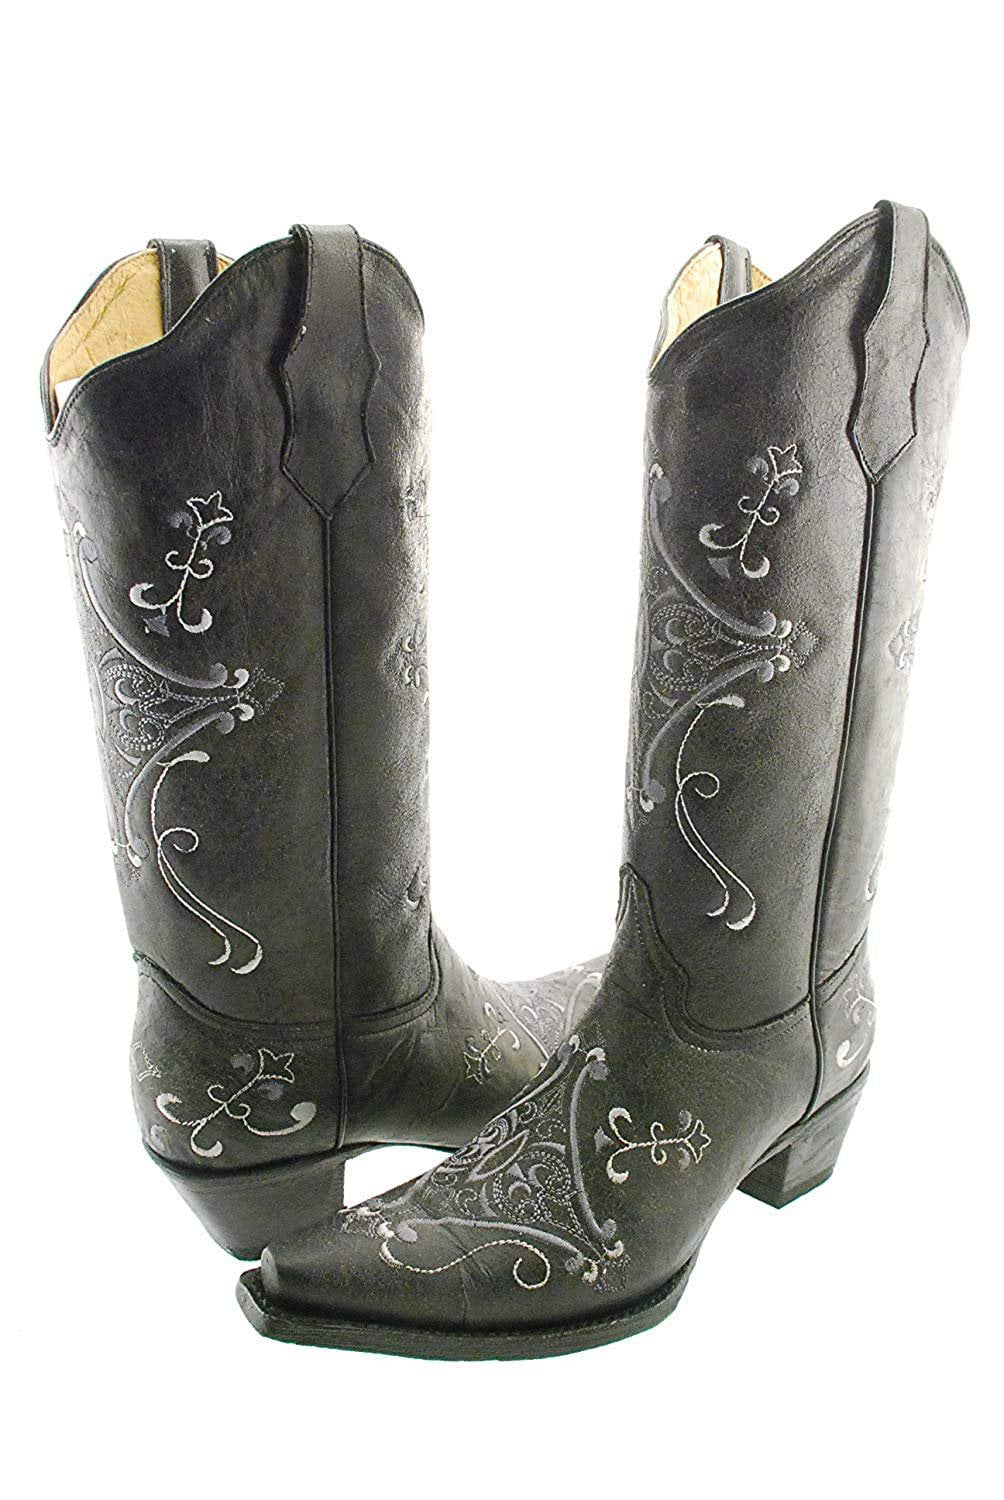 Corral Womens Circle G Crackle Scroll Bone Embroidered Western Boot